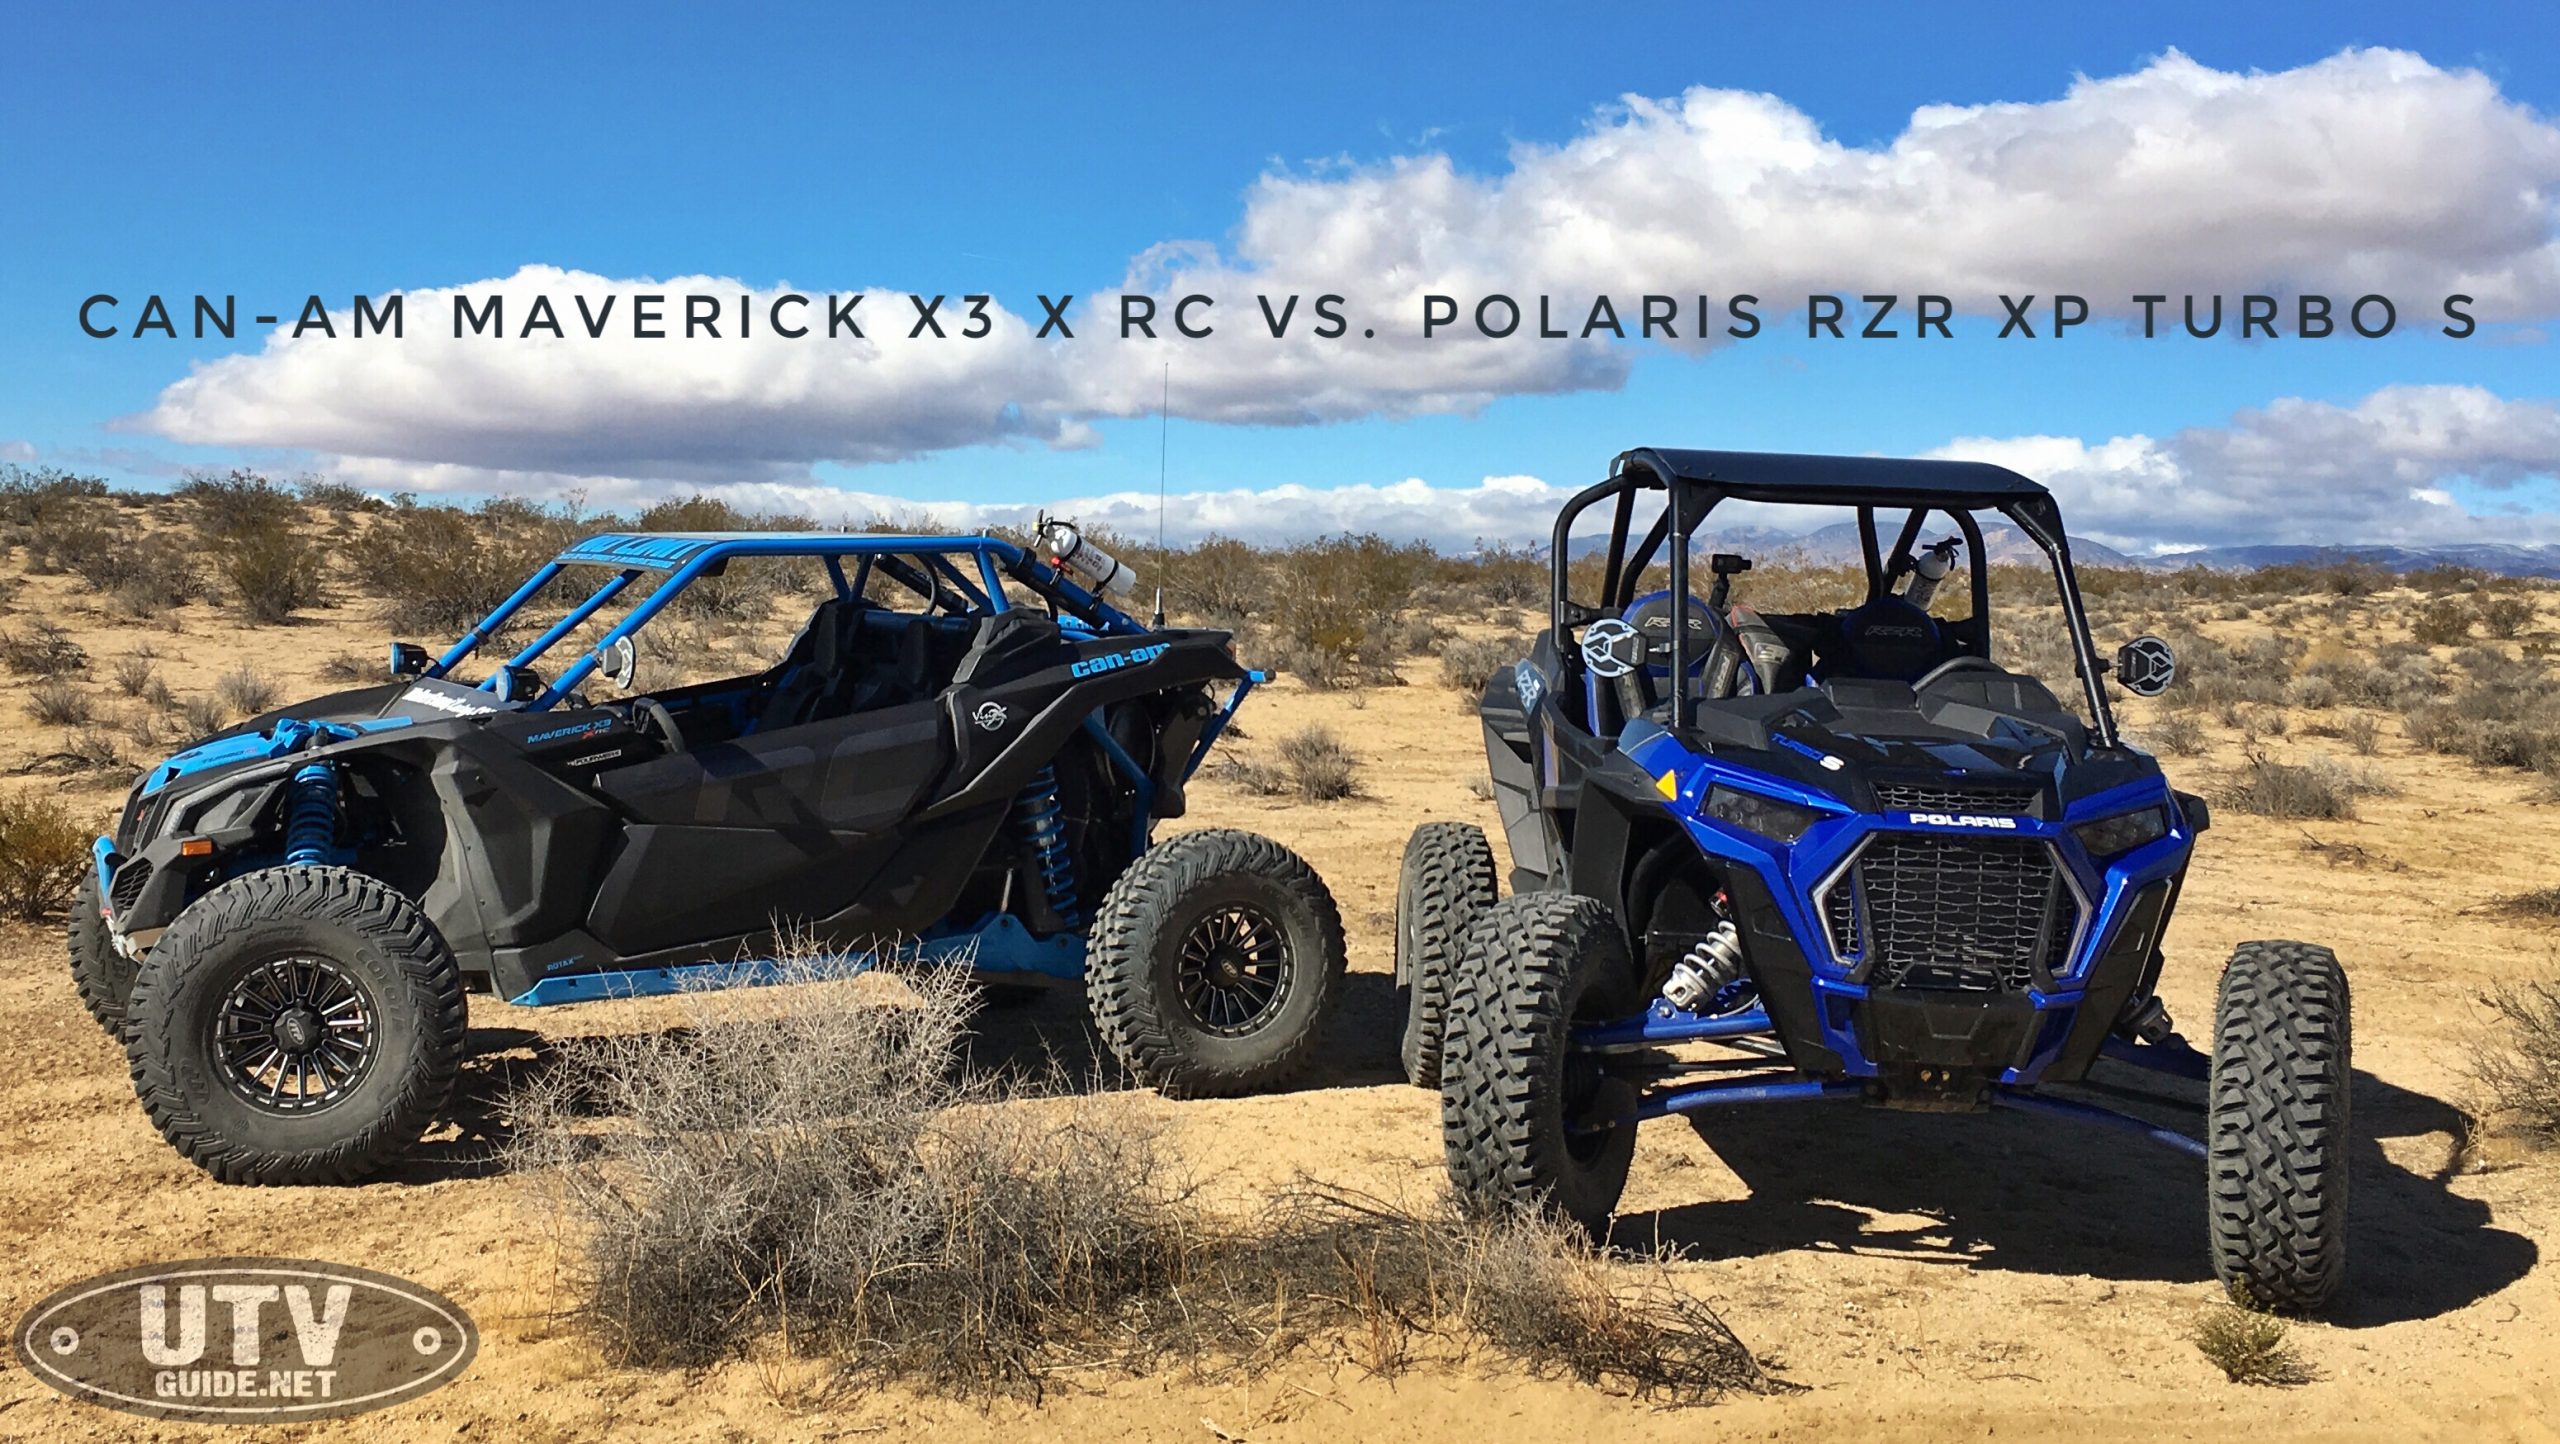 First Impressions of the 2021 Can-Am Maverick X3